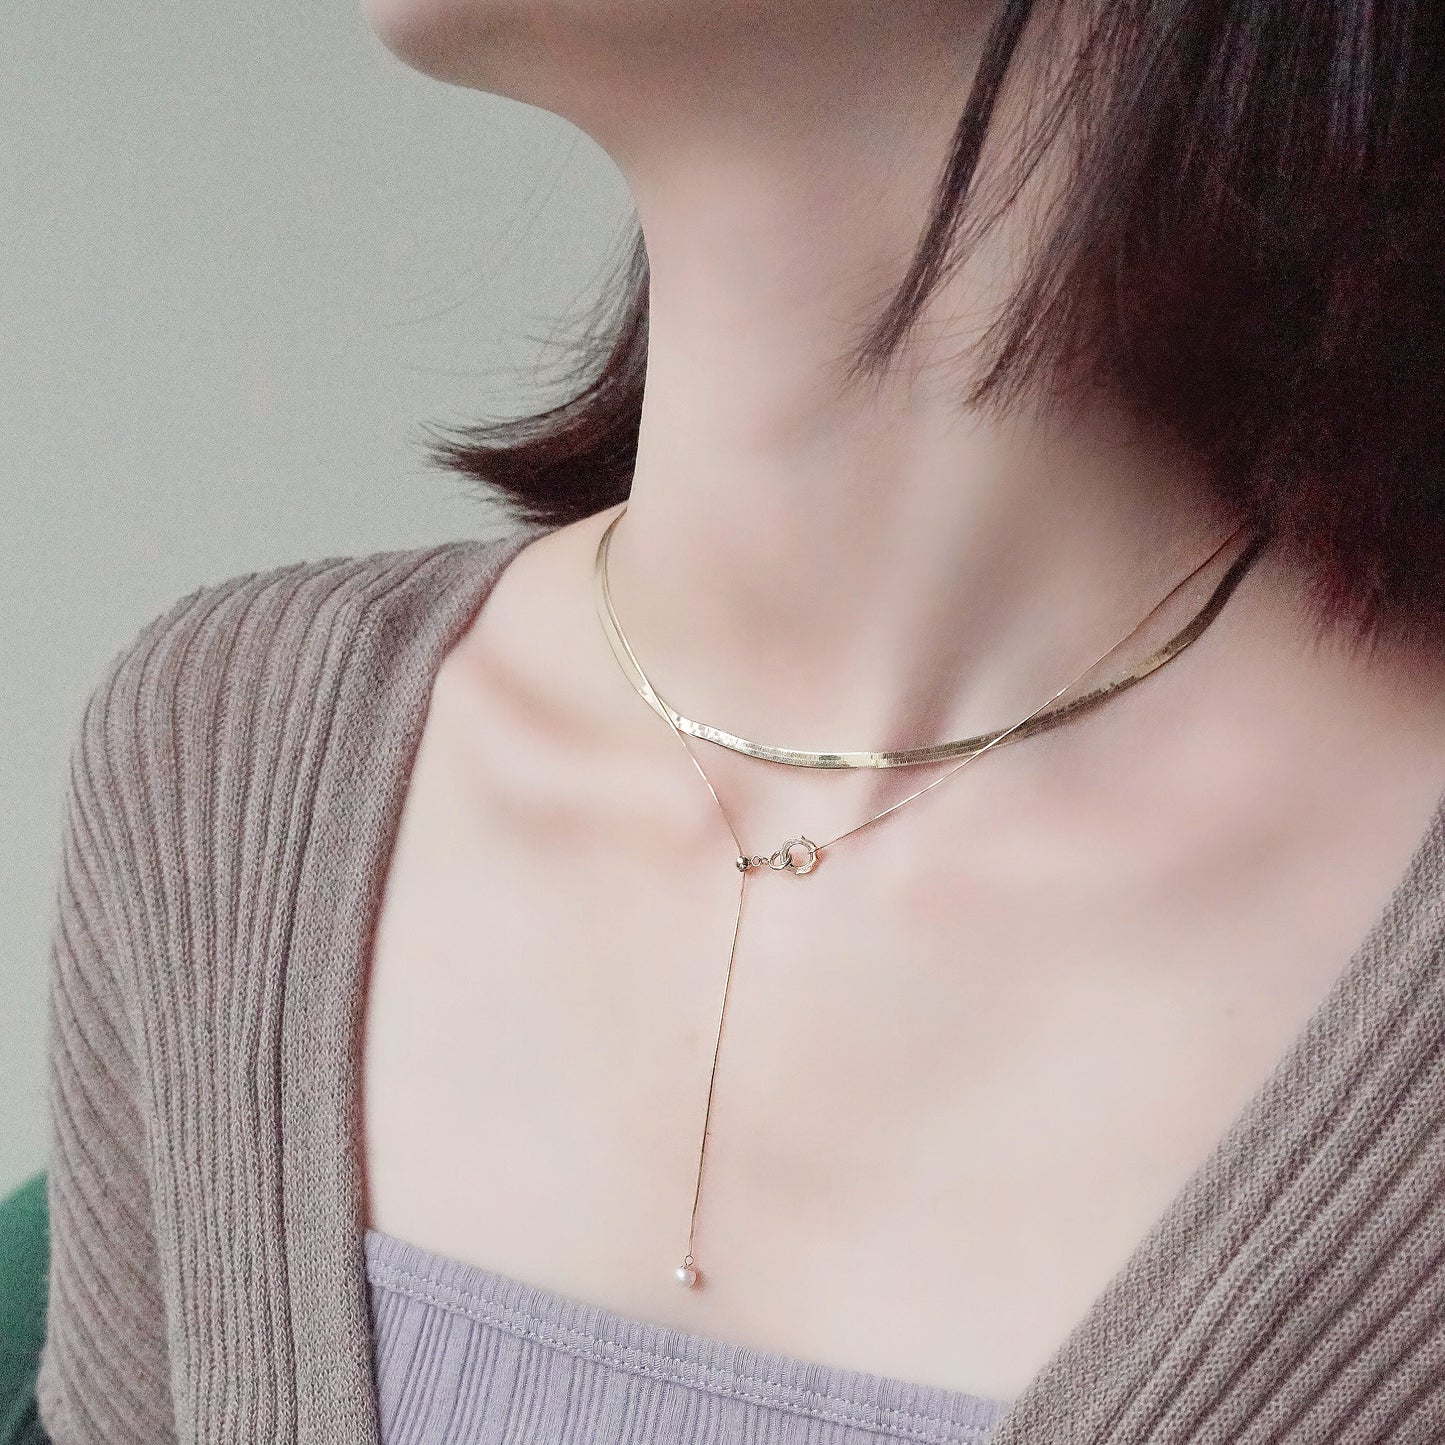 LEGACY--K18 Yellow Gold Thin-Snake-Chain Necklace